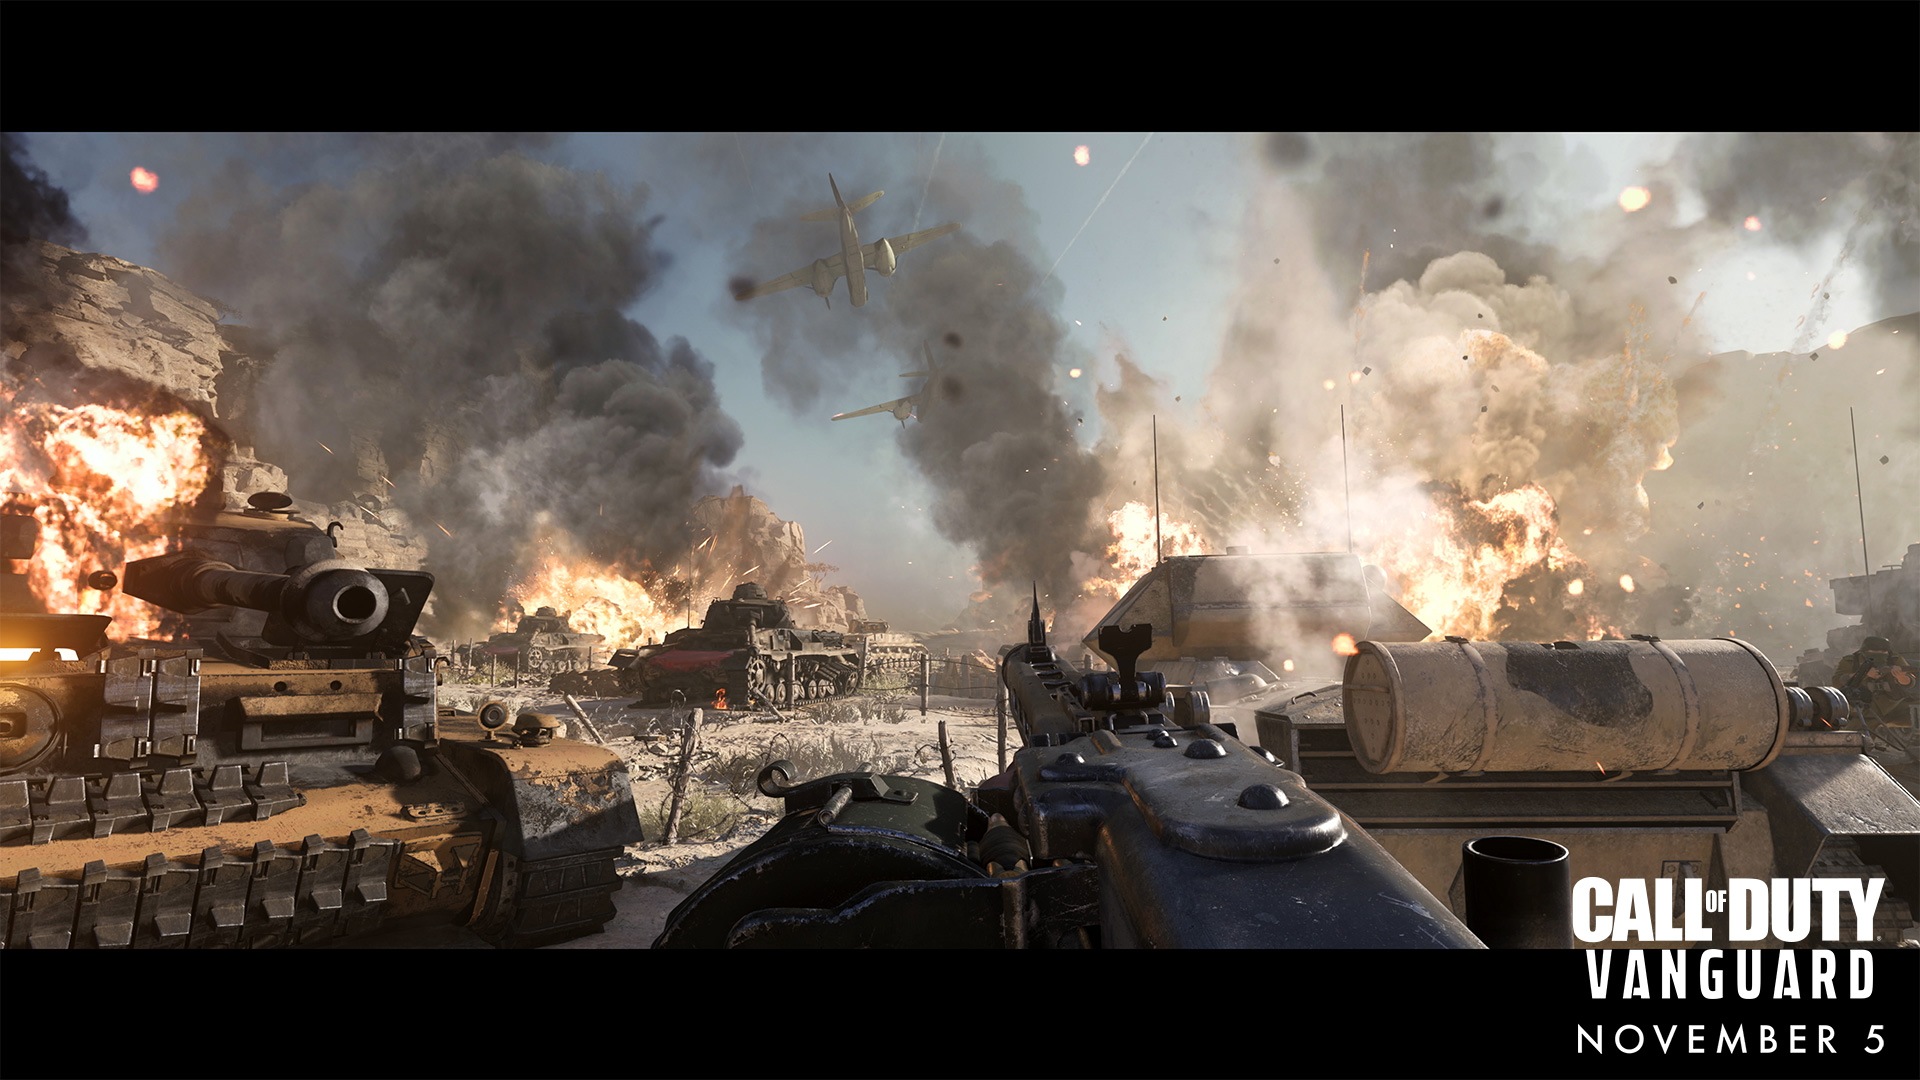 Call of Duty: Vanguard PC Trailer, Specs, and Preloading